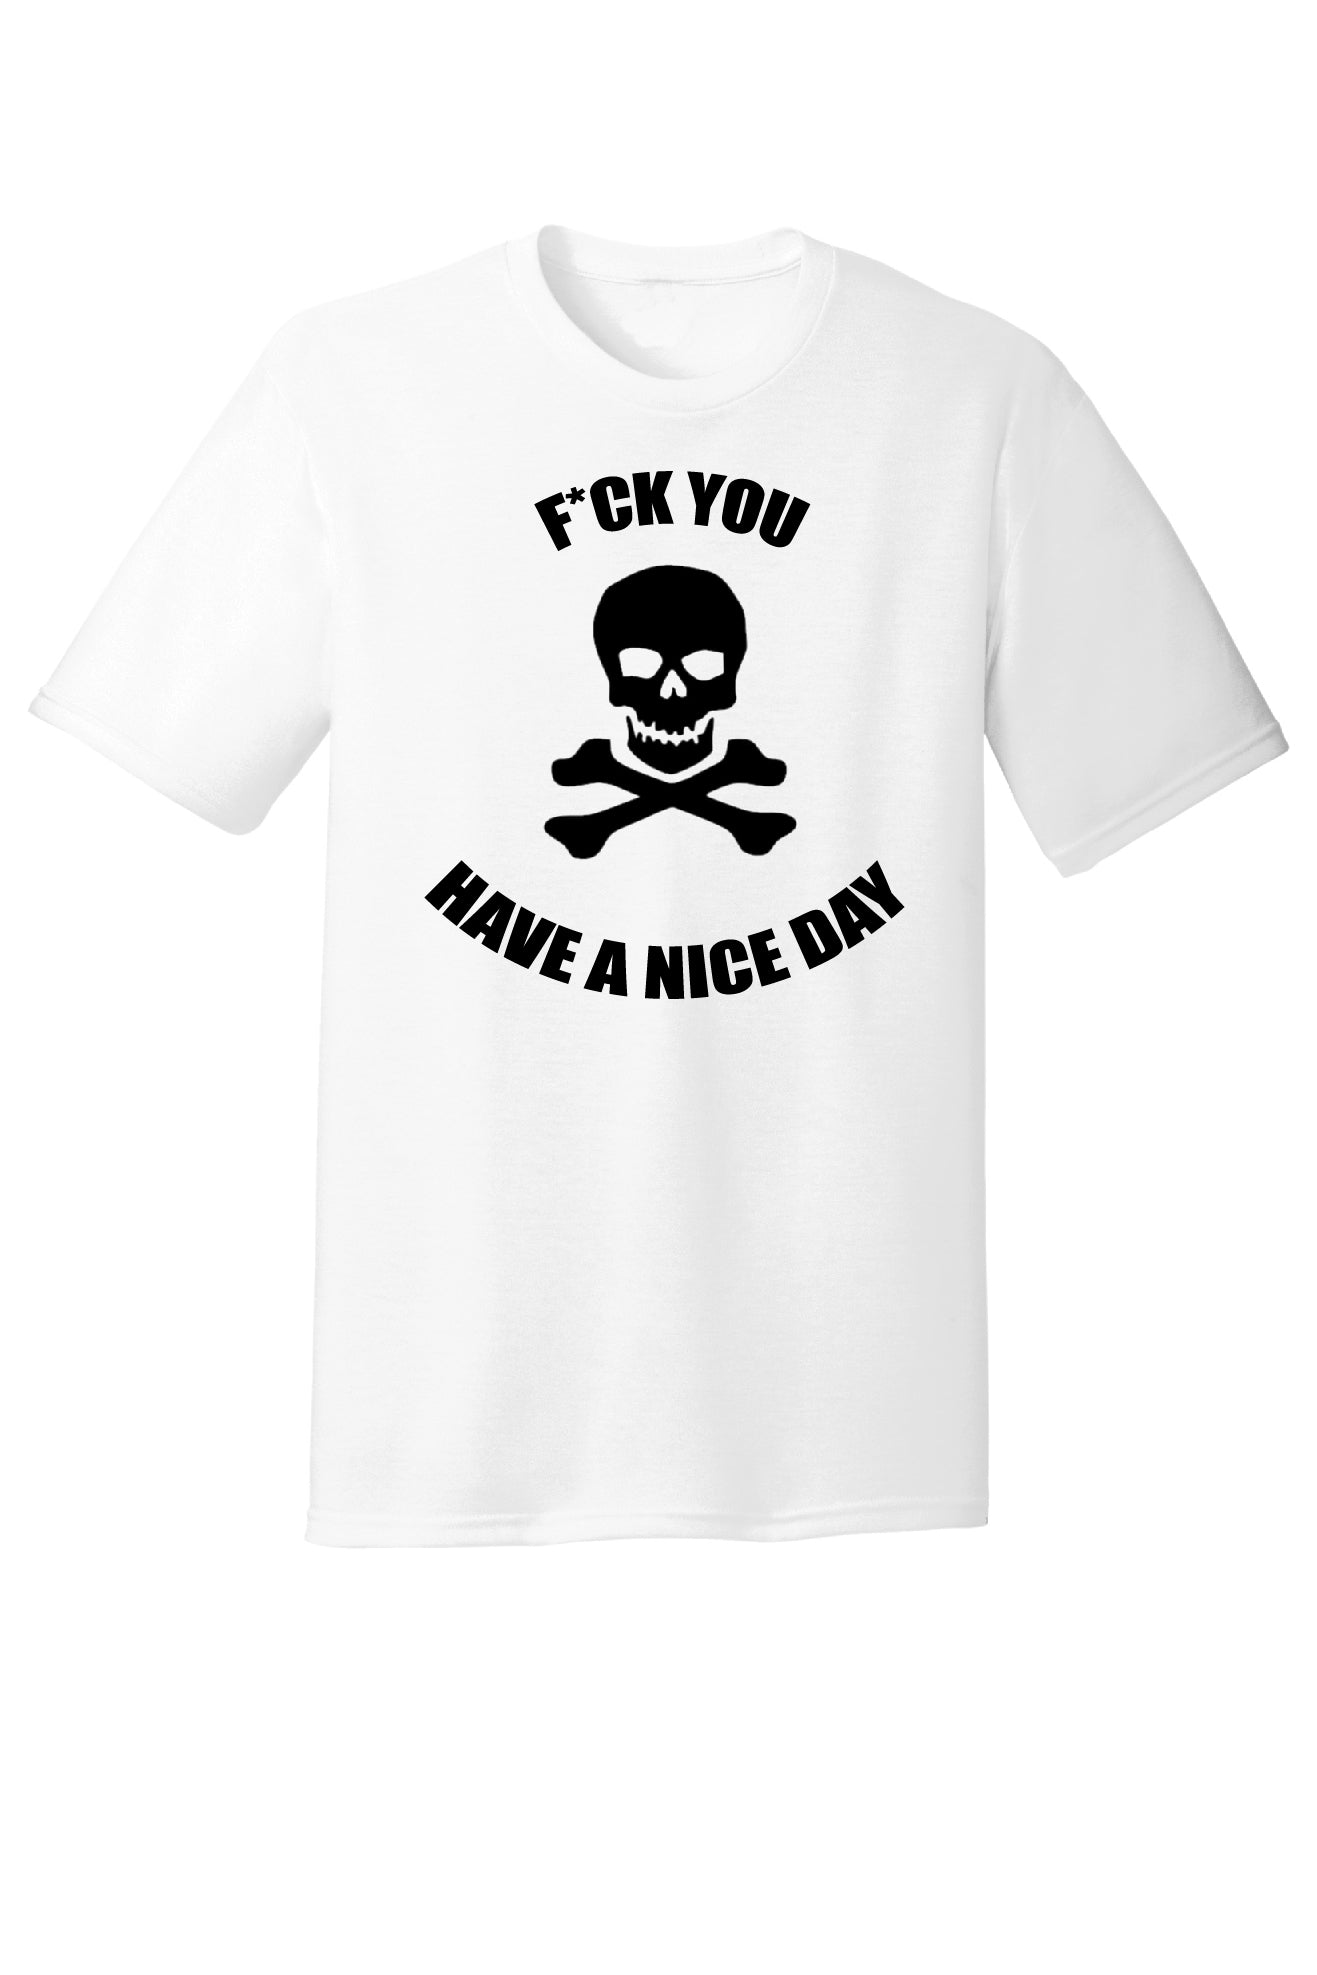 F*CK YOU, Have a Nice Day, Skull Tee